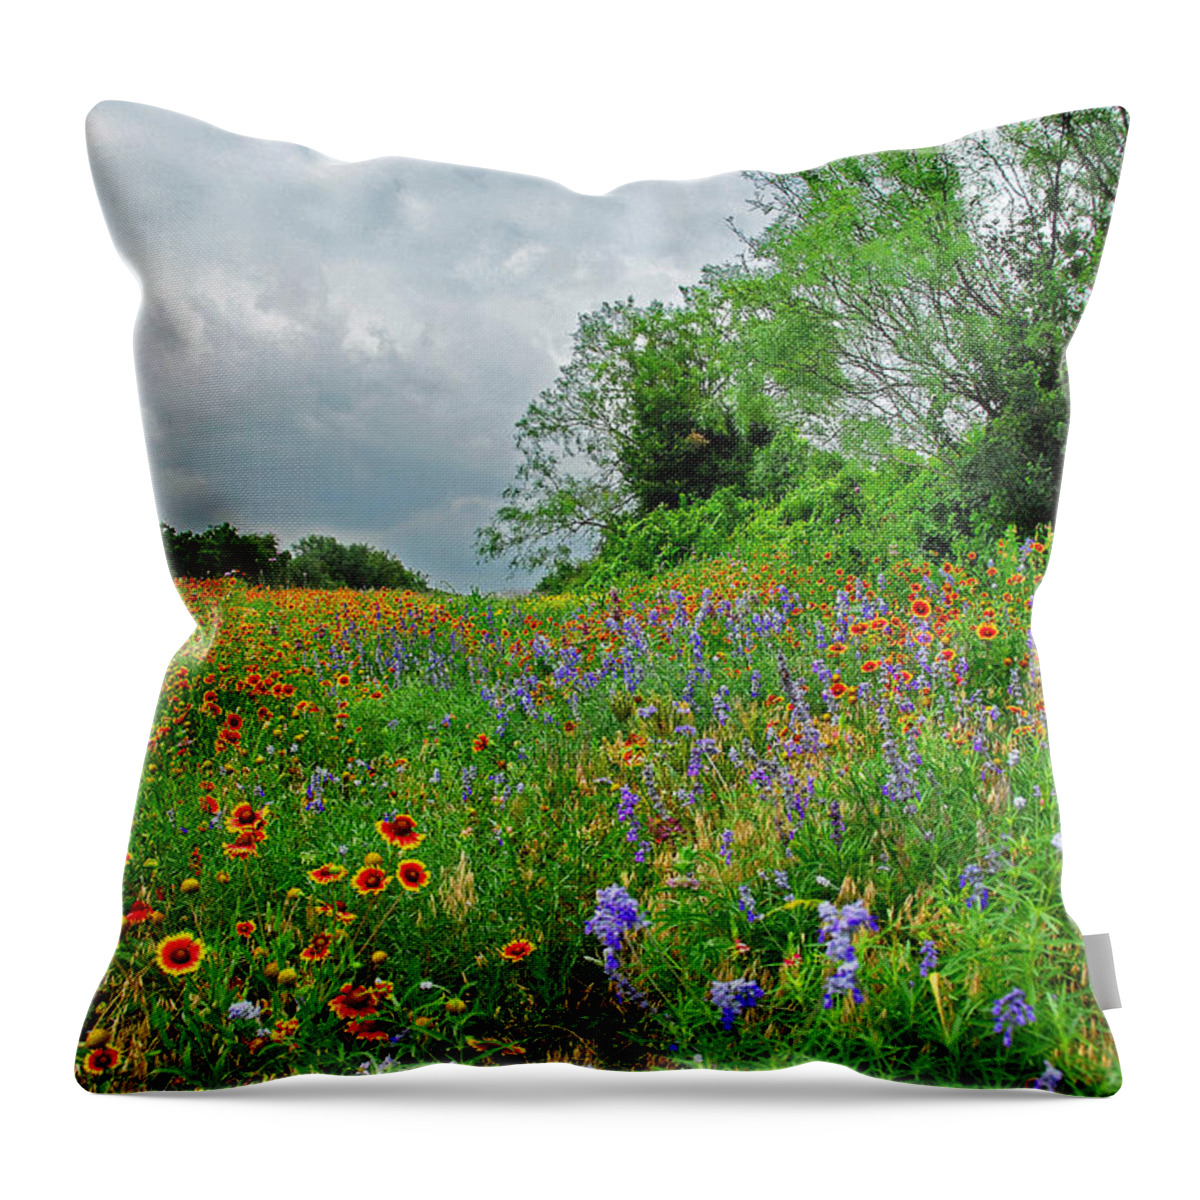 Wildflowers Throw Pillow featuring the photograph Texas Roadside Wildflowers by Lynn Bauer